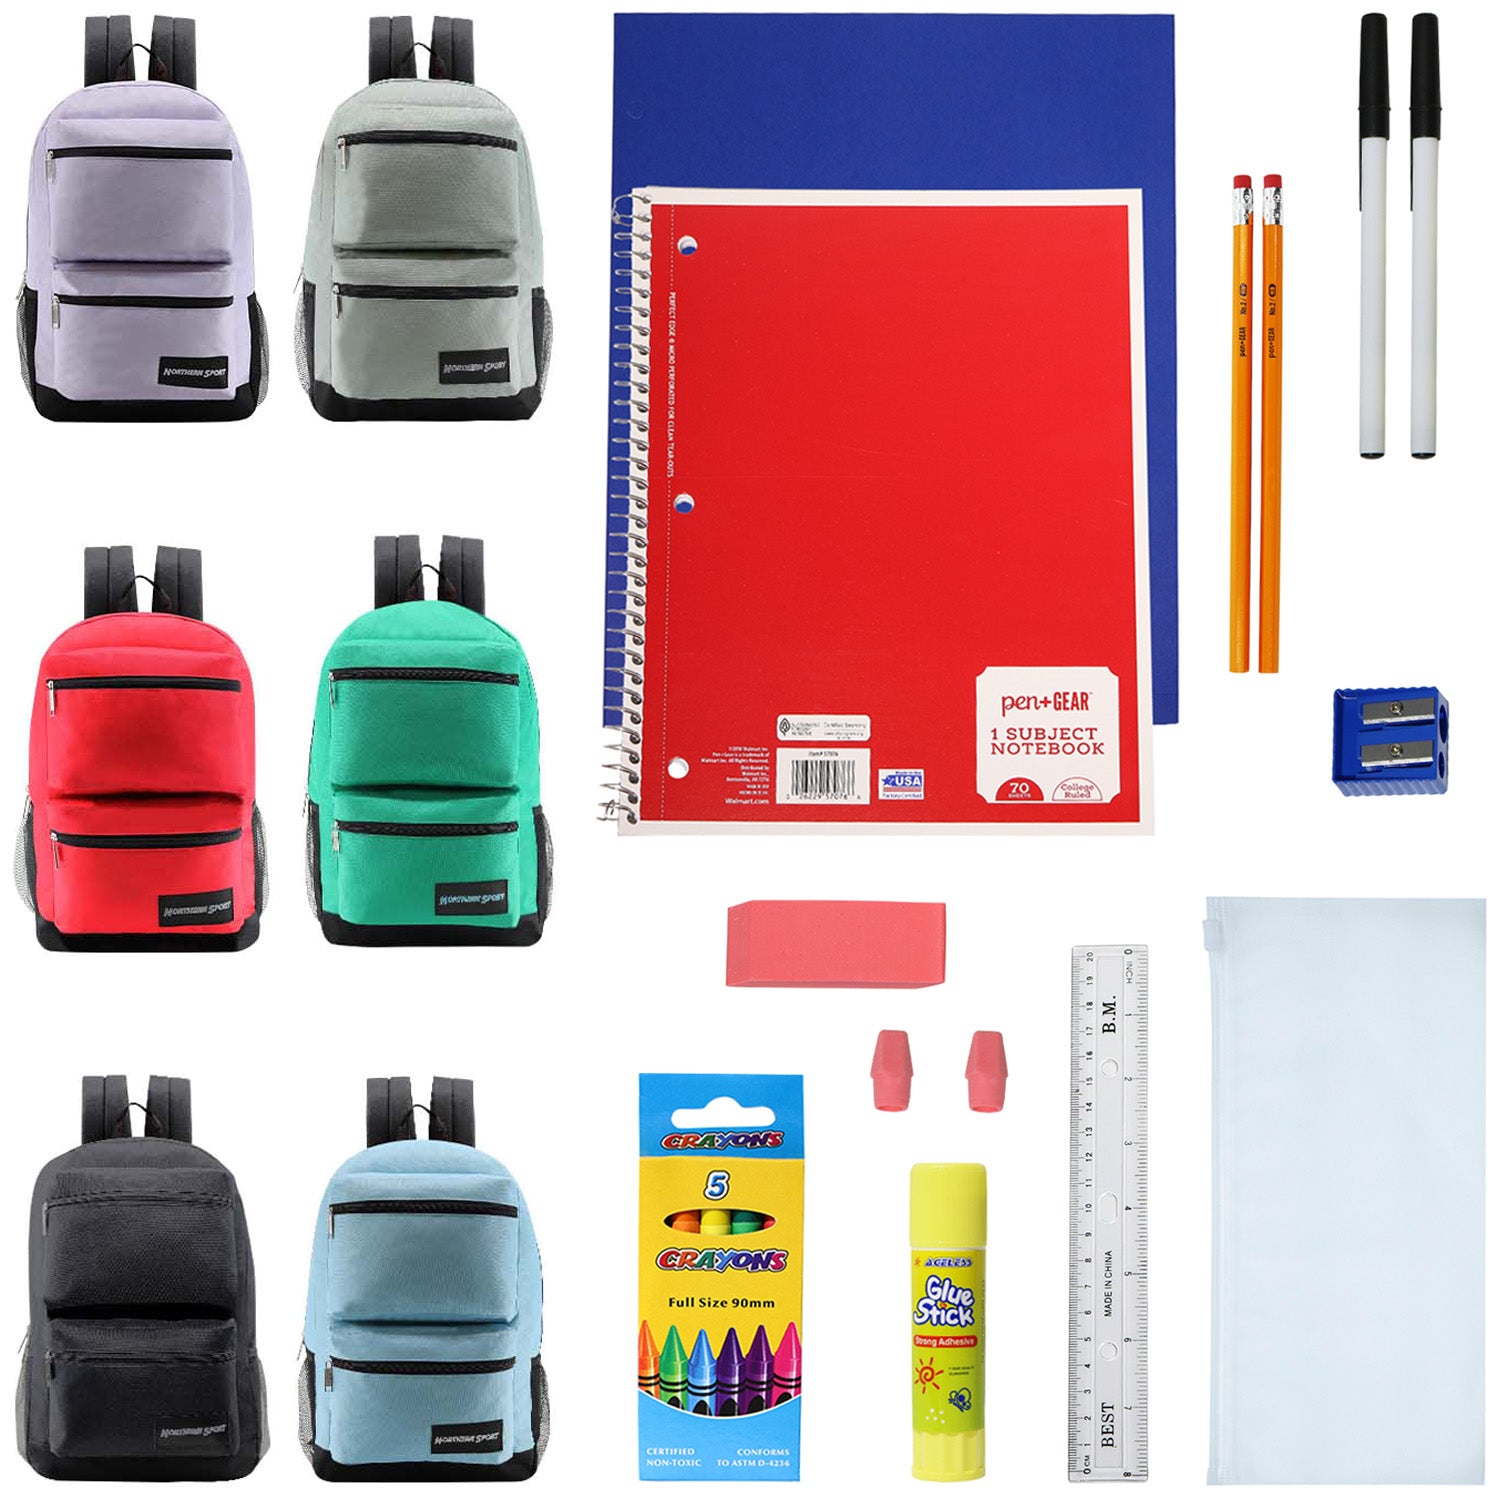 18 Piece Wholesale Basic School Supply Kit With 19" Backpack - Bulk Case of 6 Backpacks and Kits